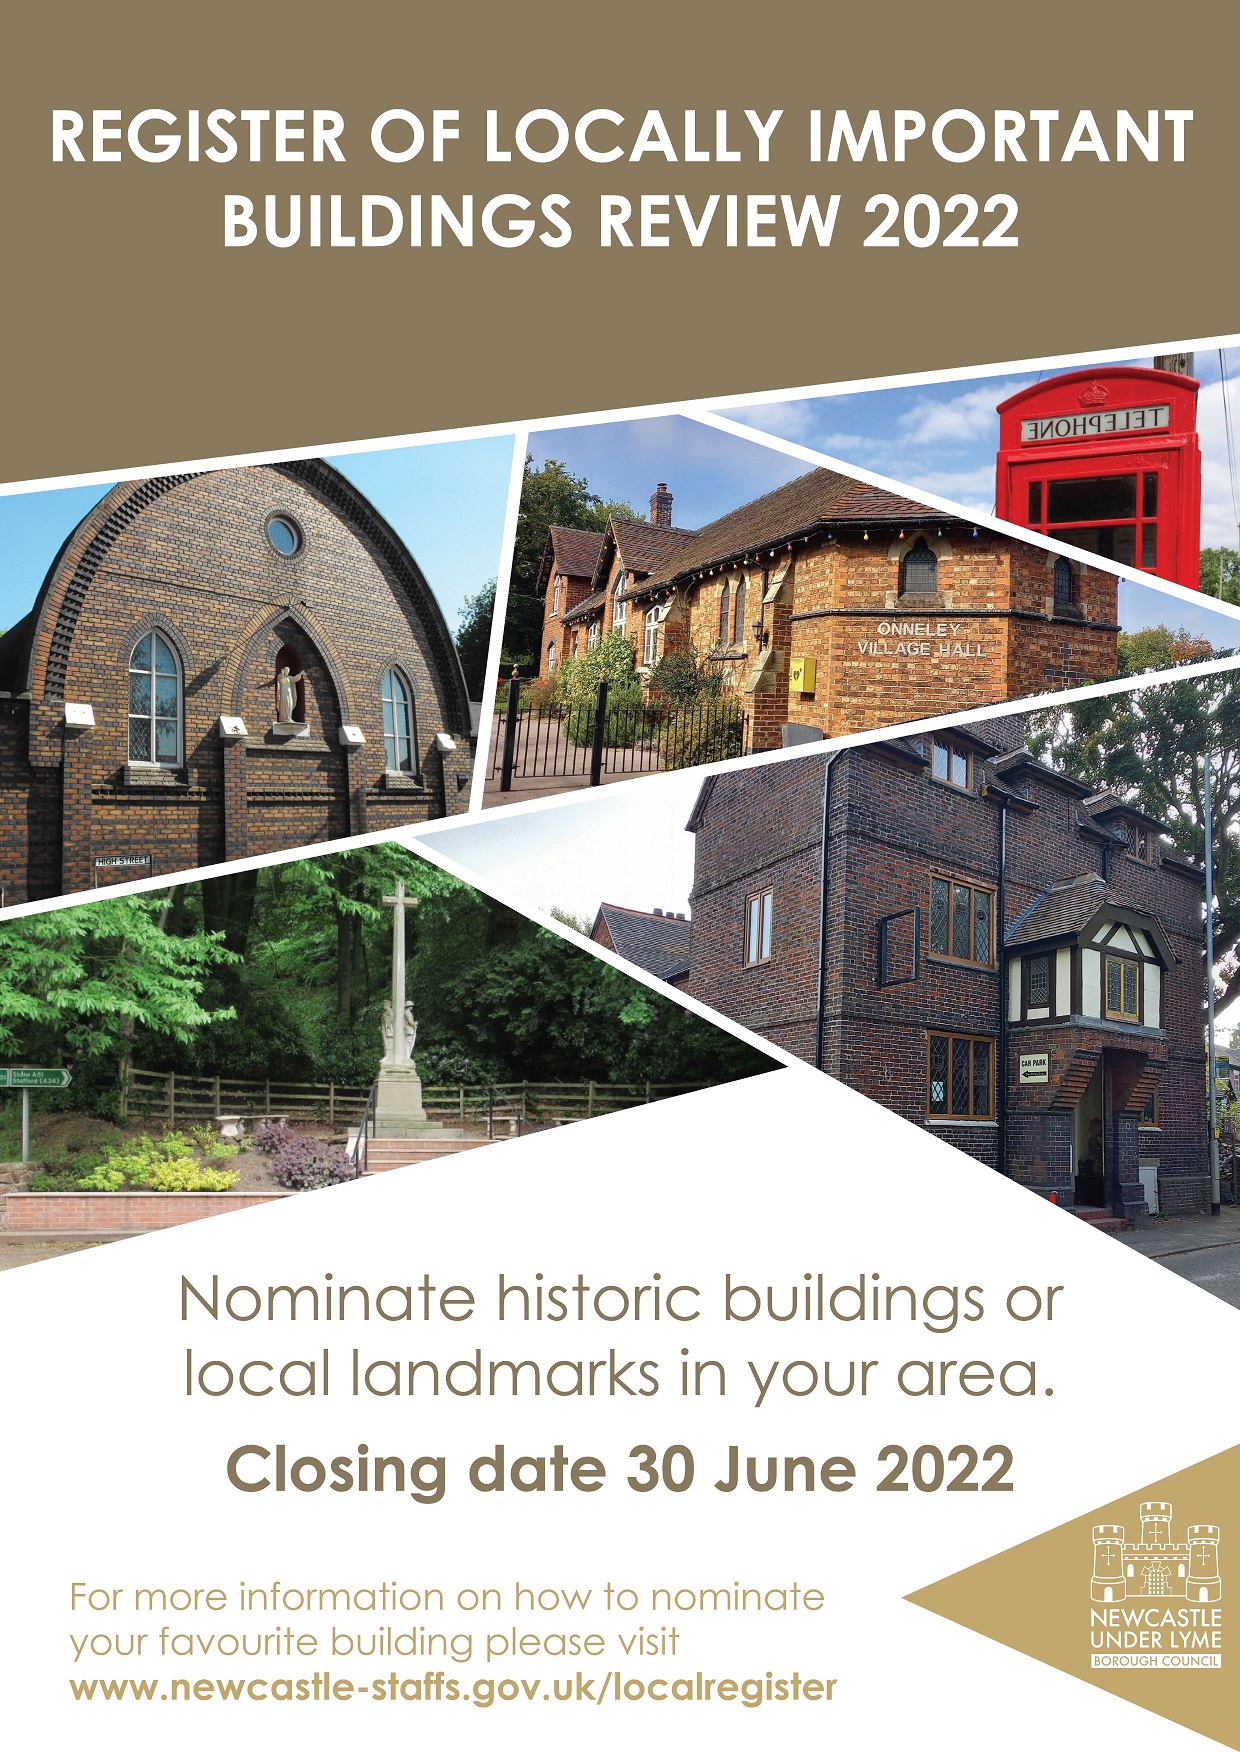 Register of locally important buildings poster 2022